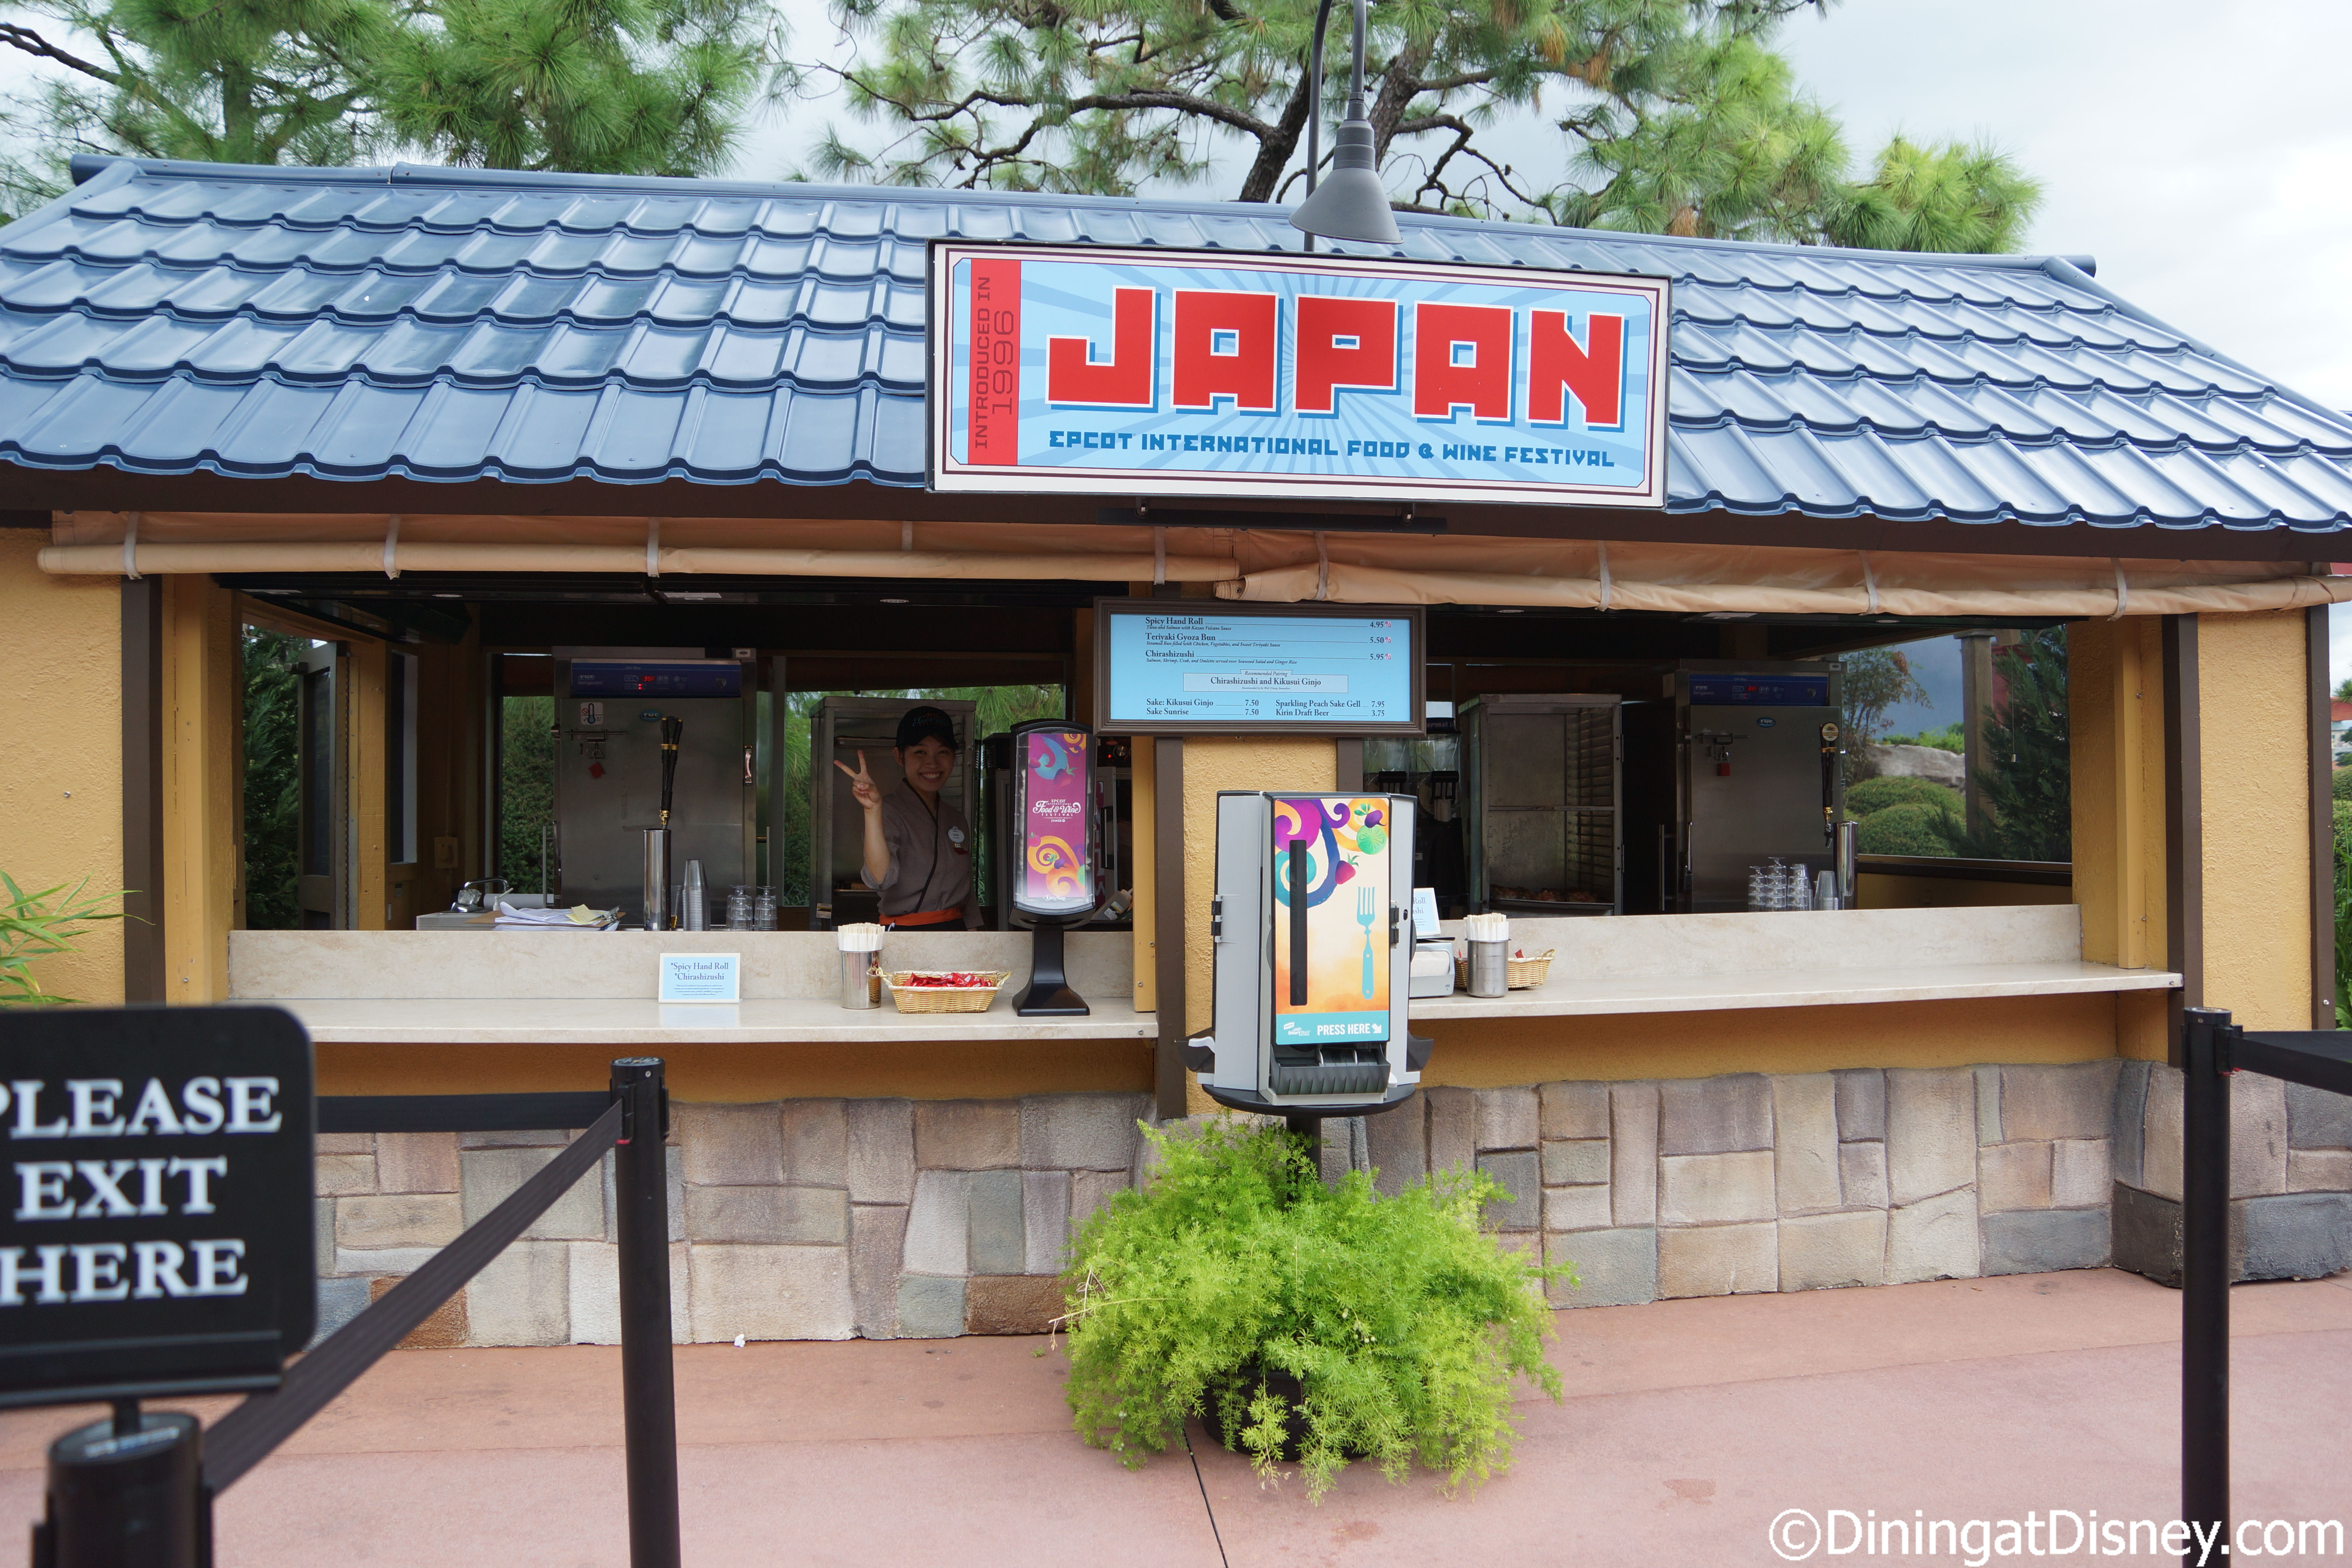 The 2014 Epcot Food and Wine Festival Japan booth